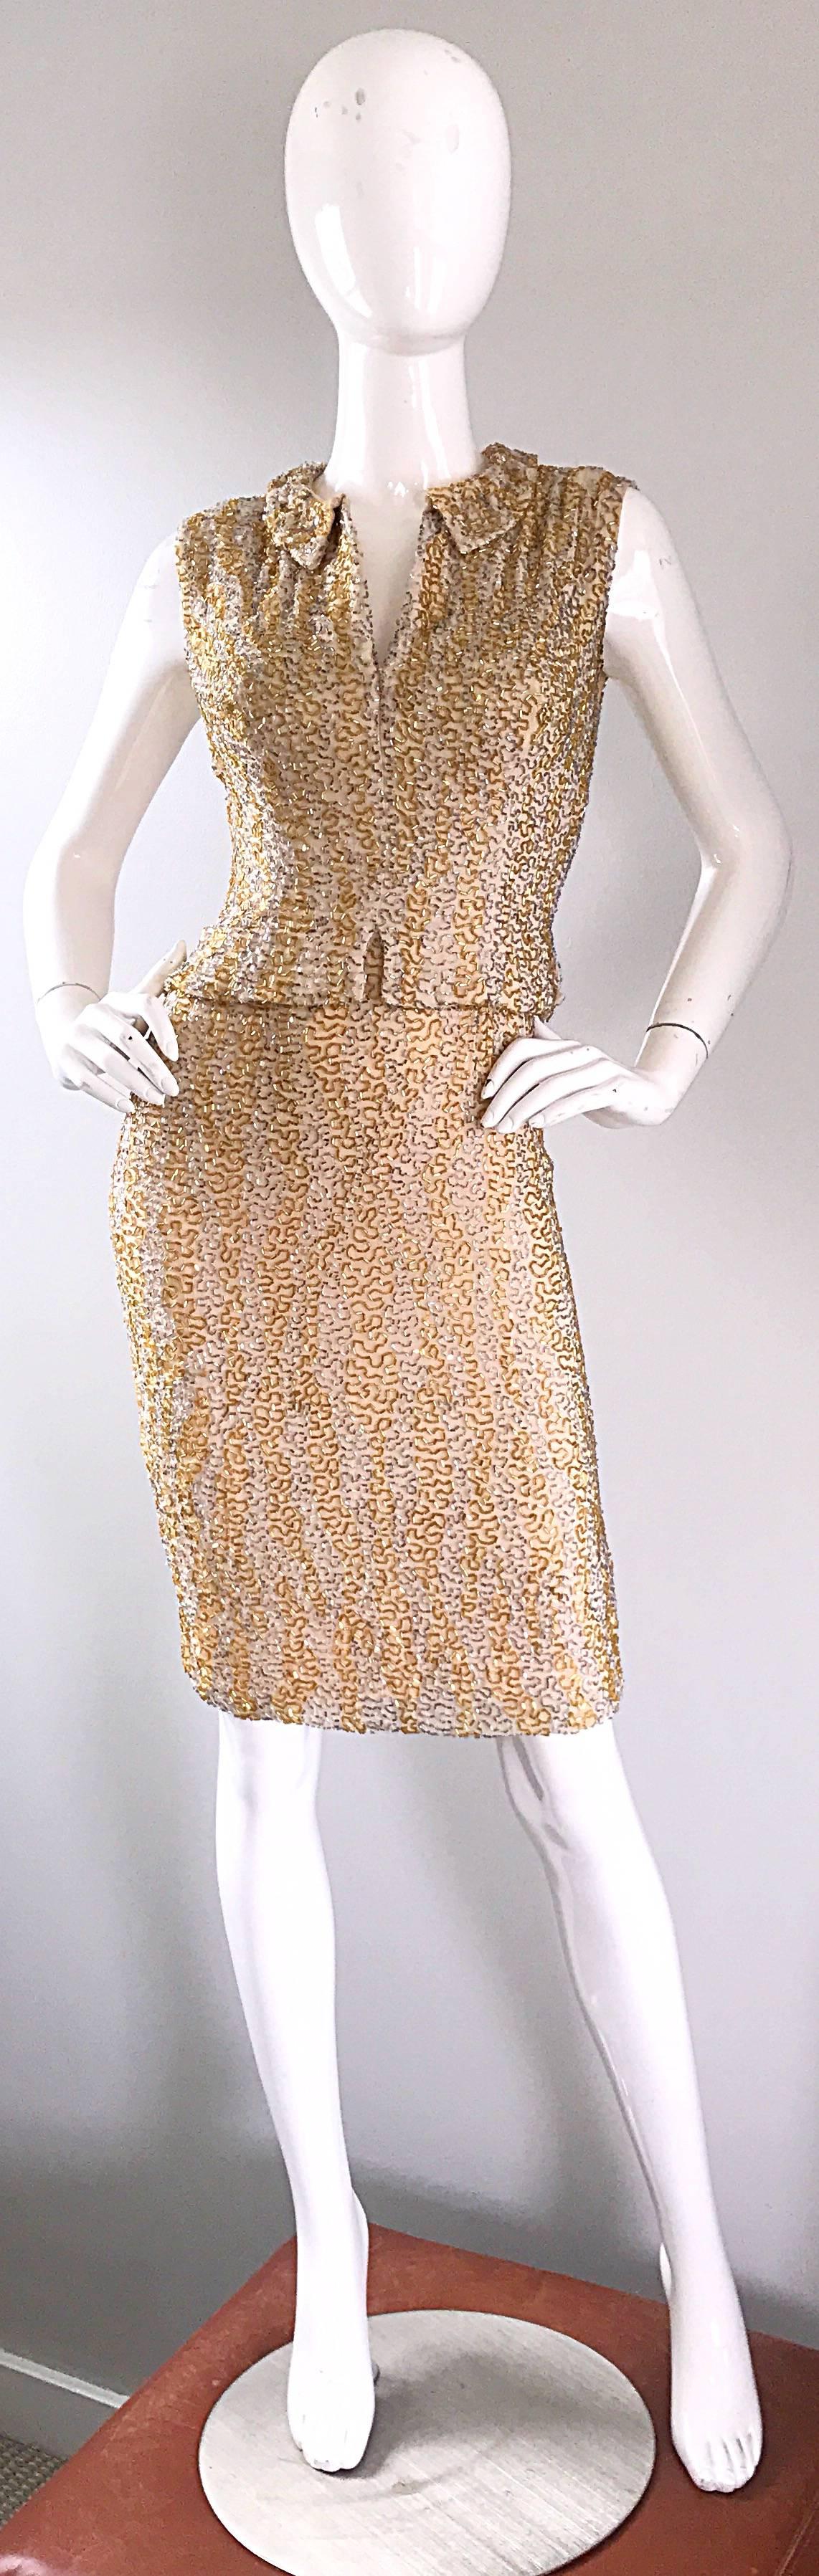 Gorgeous vintage 50s HARVEY FURST demi couture heavily beaded gold and silver silk chiffon dress! Features thousands of hand-sewn silver and gold beads throughout. Soft luxurious ivory silk chiffon feels great against the skin. Chic Peter Pan